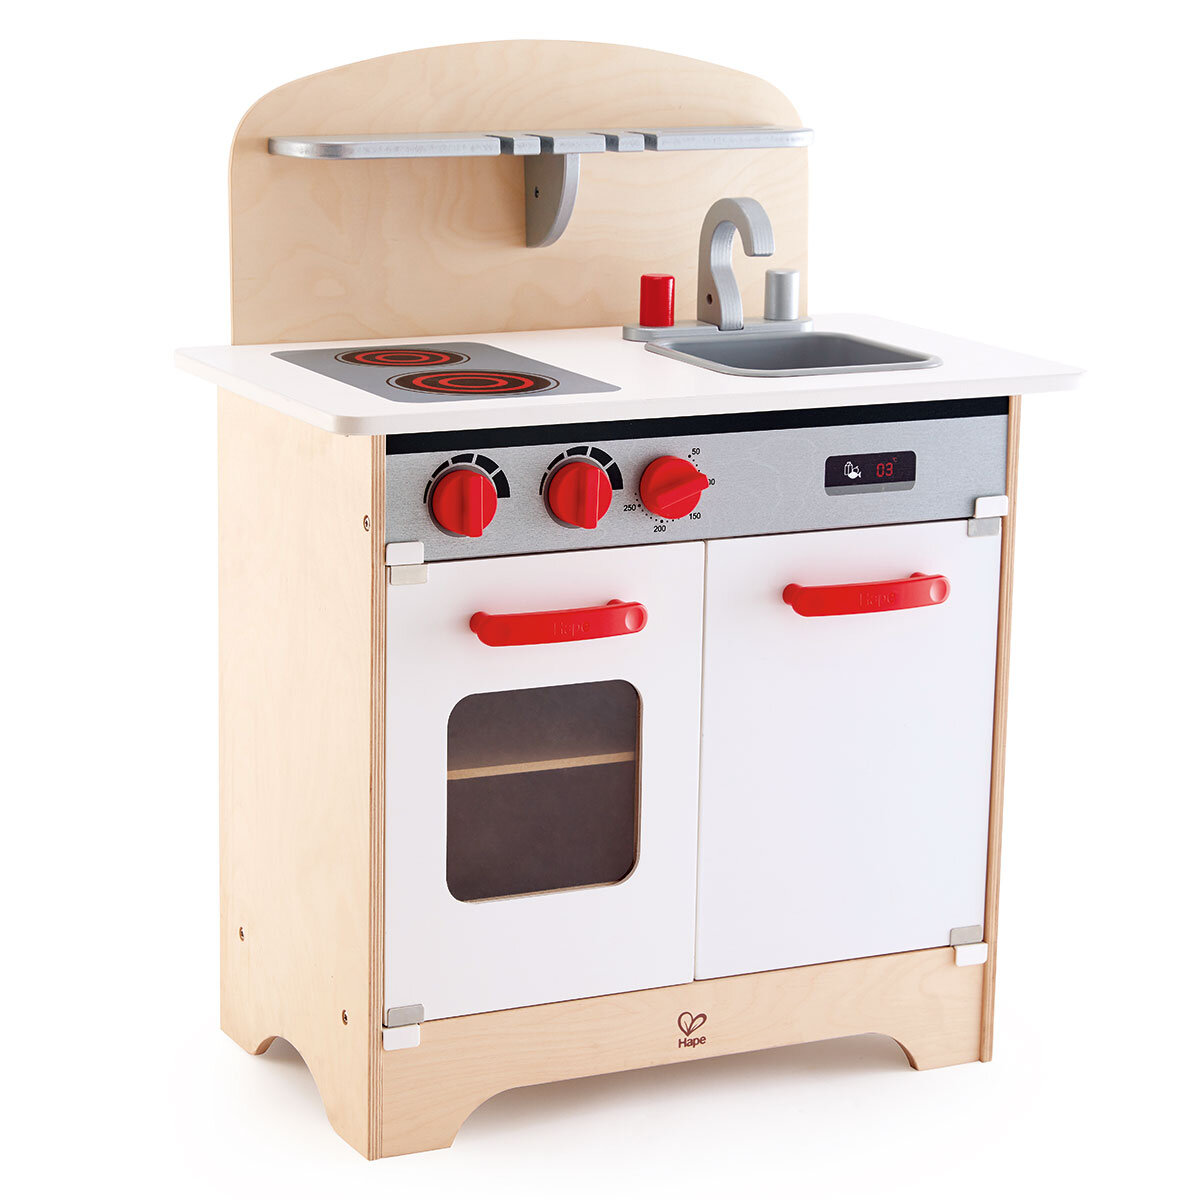 Buy Hape Deluxe Mini Kitchen Overview Image at Costco.co.uk